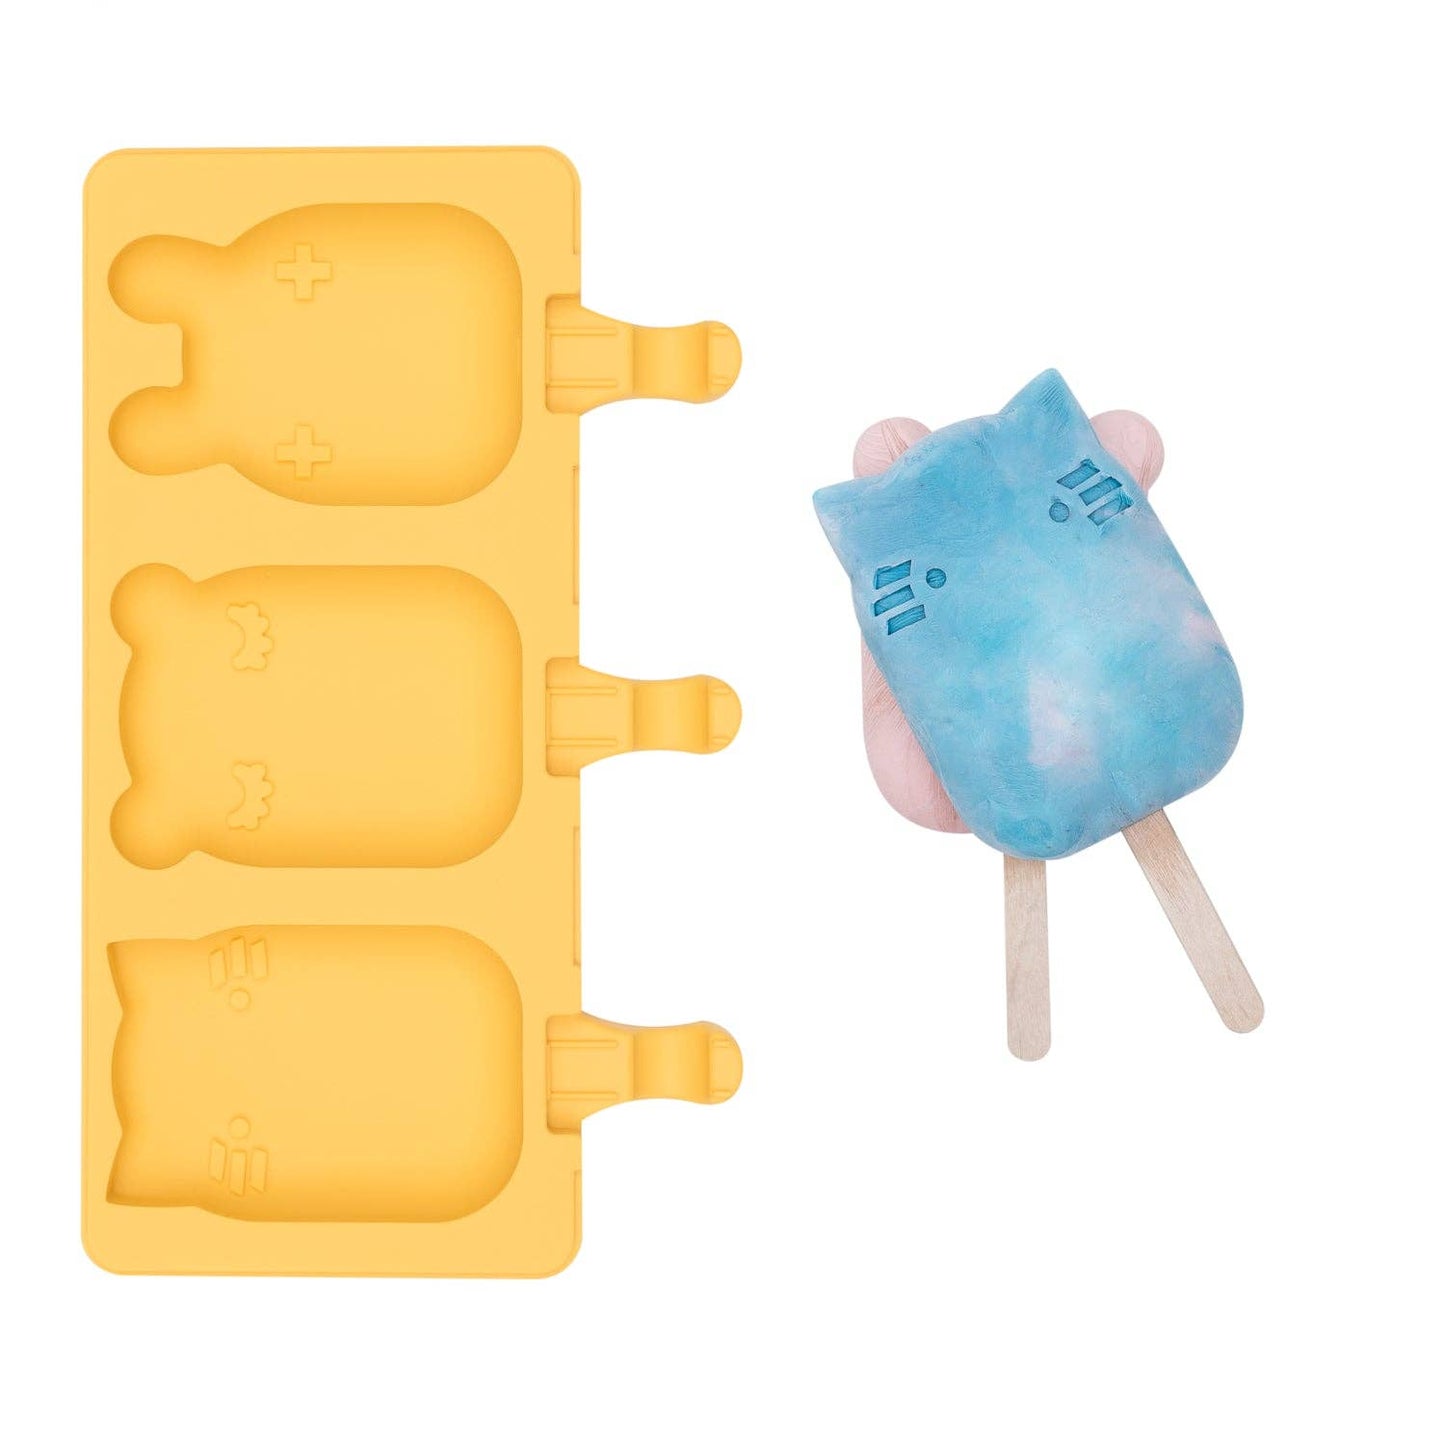 Icy pole Mould - Yellow